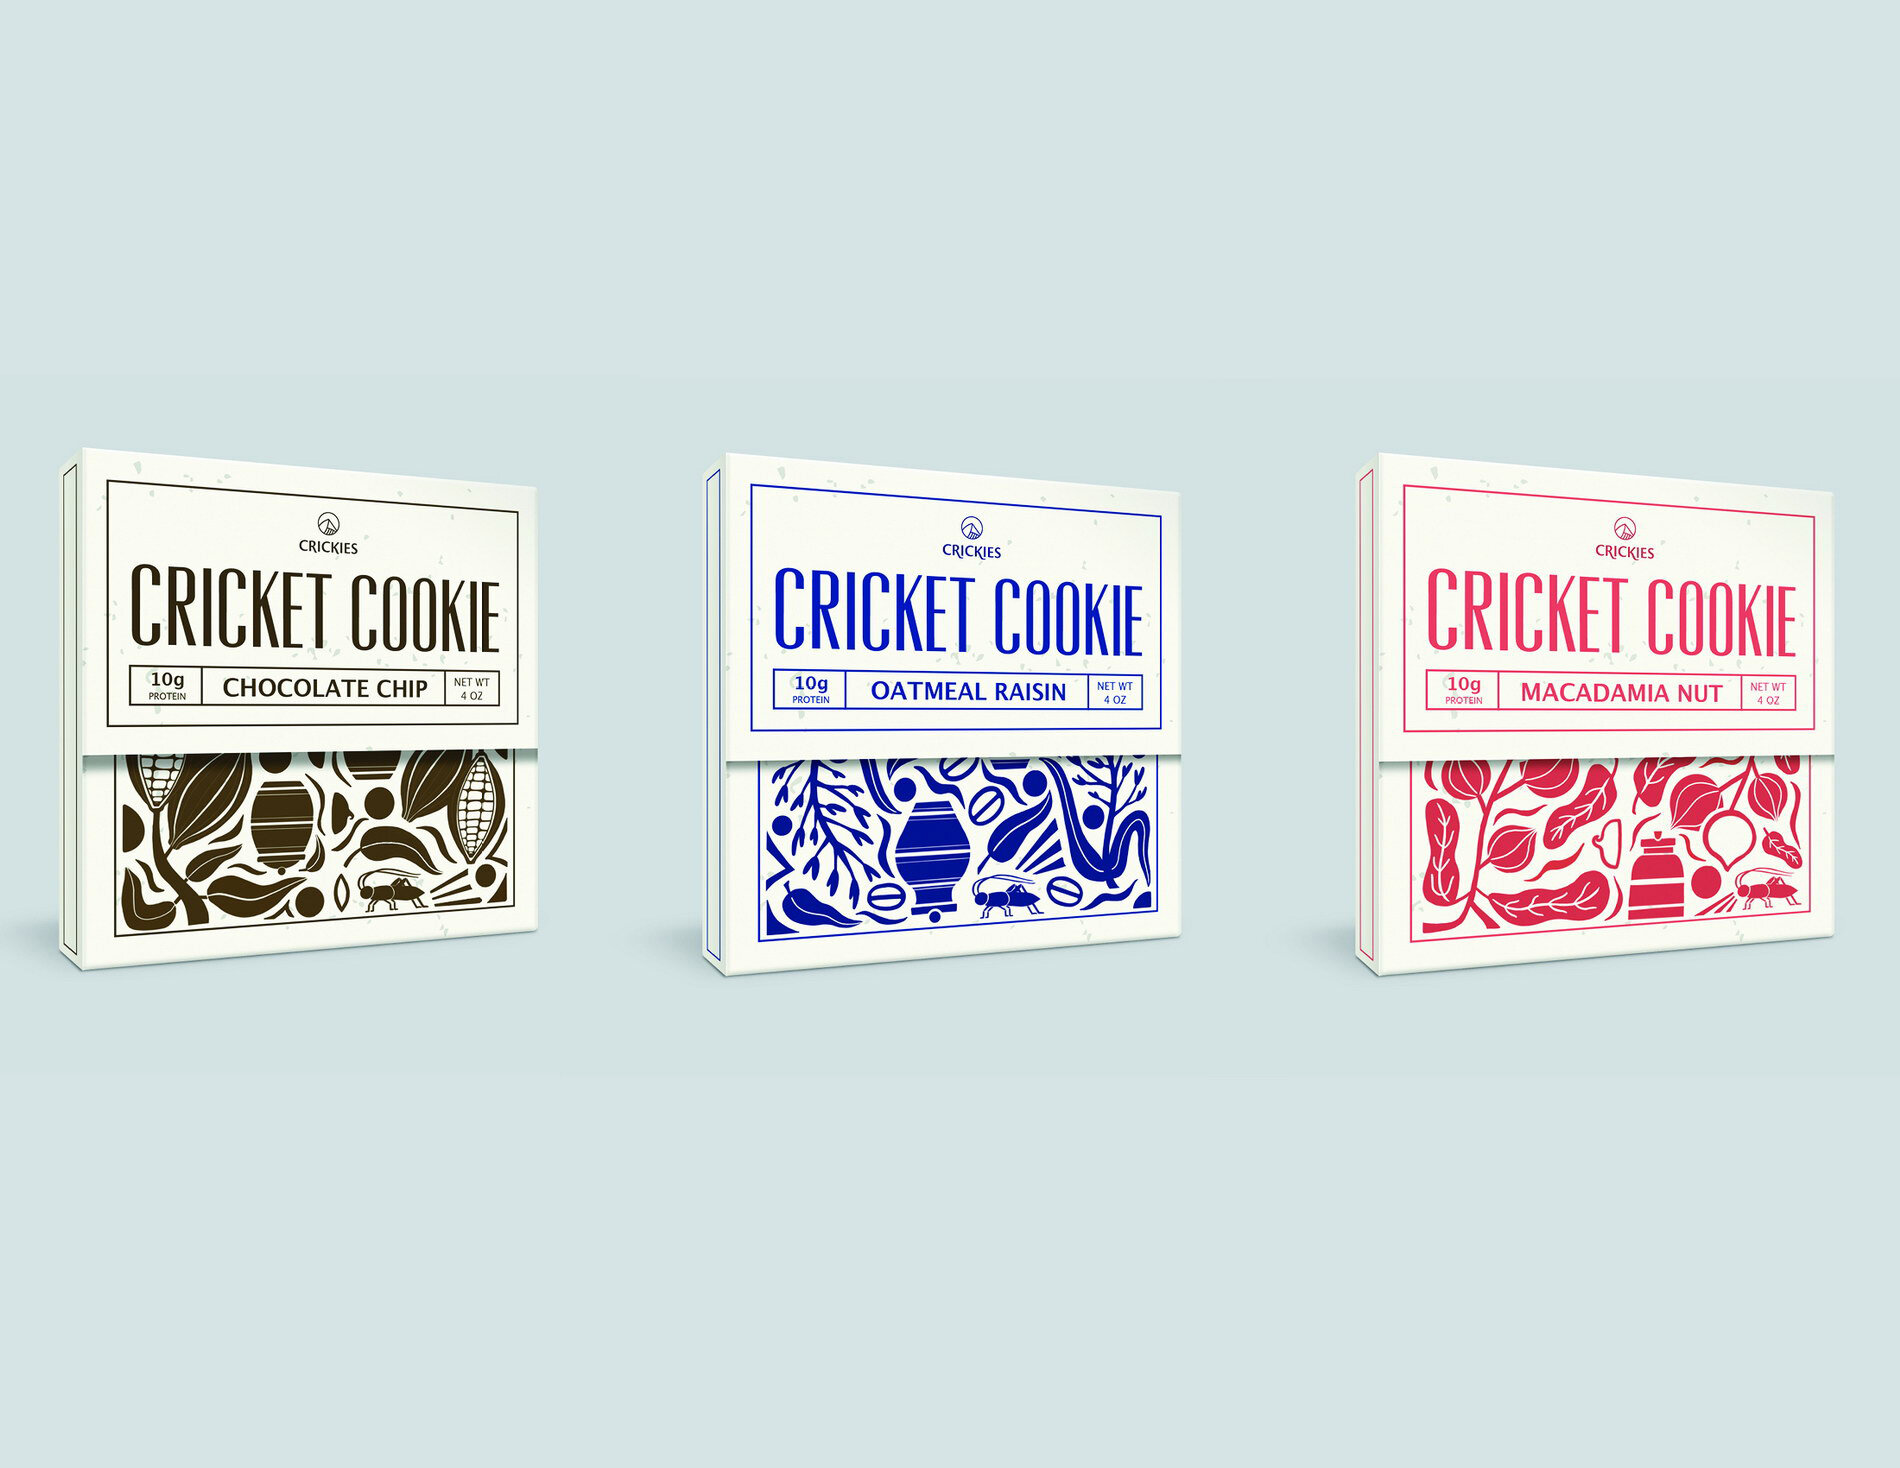 janelle-momotani--crickies-cricket-cookies-cookies-packaging-design--2020-adcc-student-competition-finalist-in-graphic-design--idea-school-of-design-grad-2022-student-work--capilano-university-north-vancouver.jpg